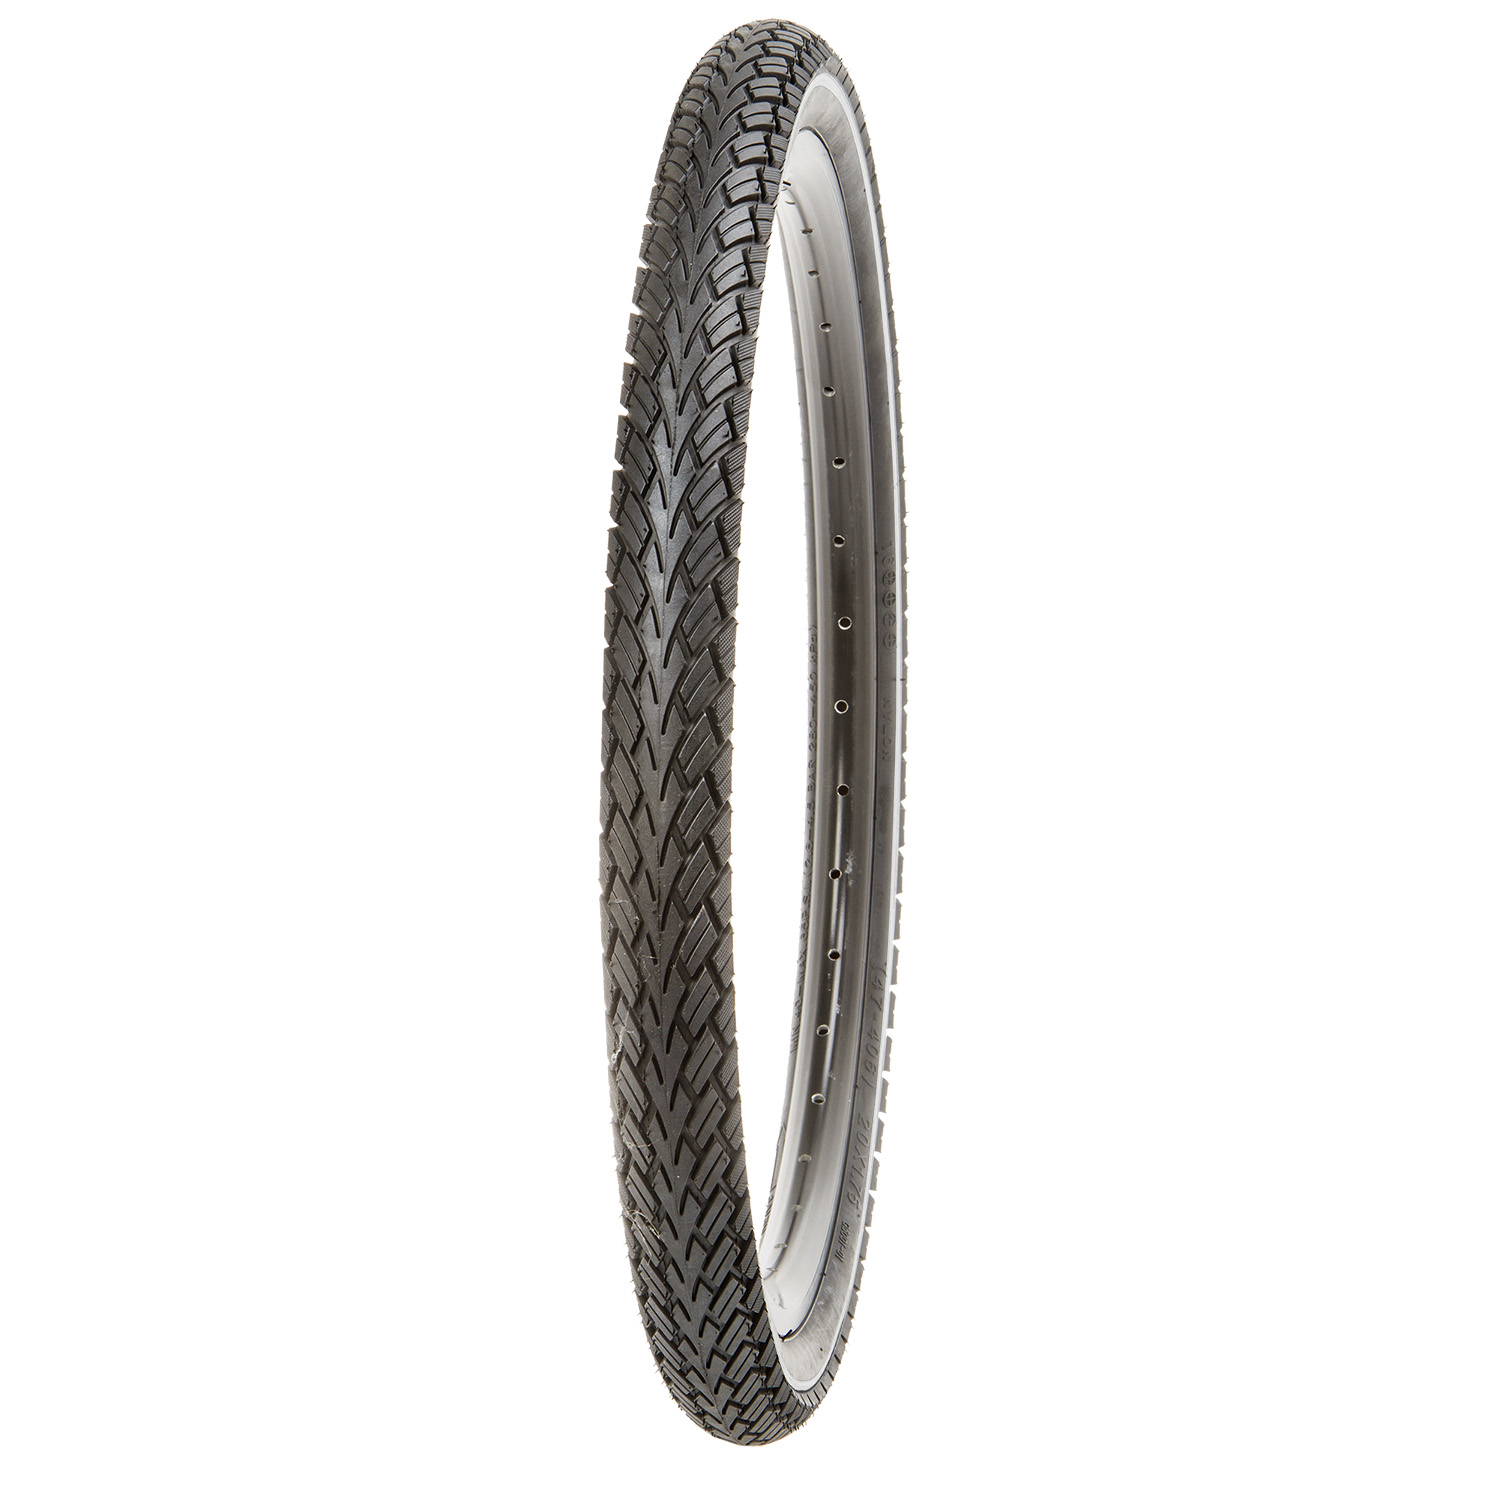 558142 – KUJO One 0 One A 28 x 1.375 x 1.625″ Clincher – AVAILABLE IN SELECTED BIKE SHOPS